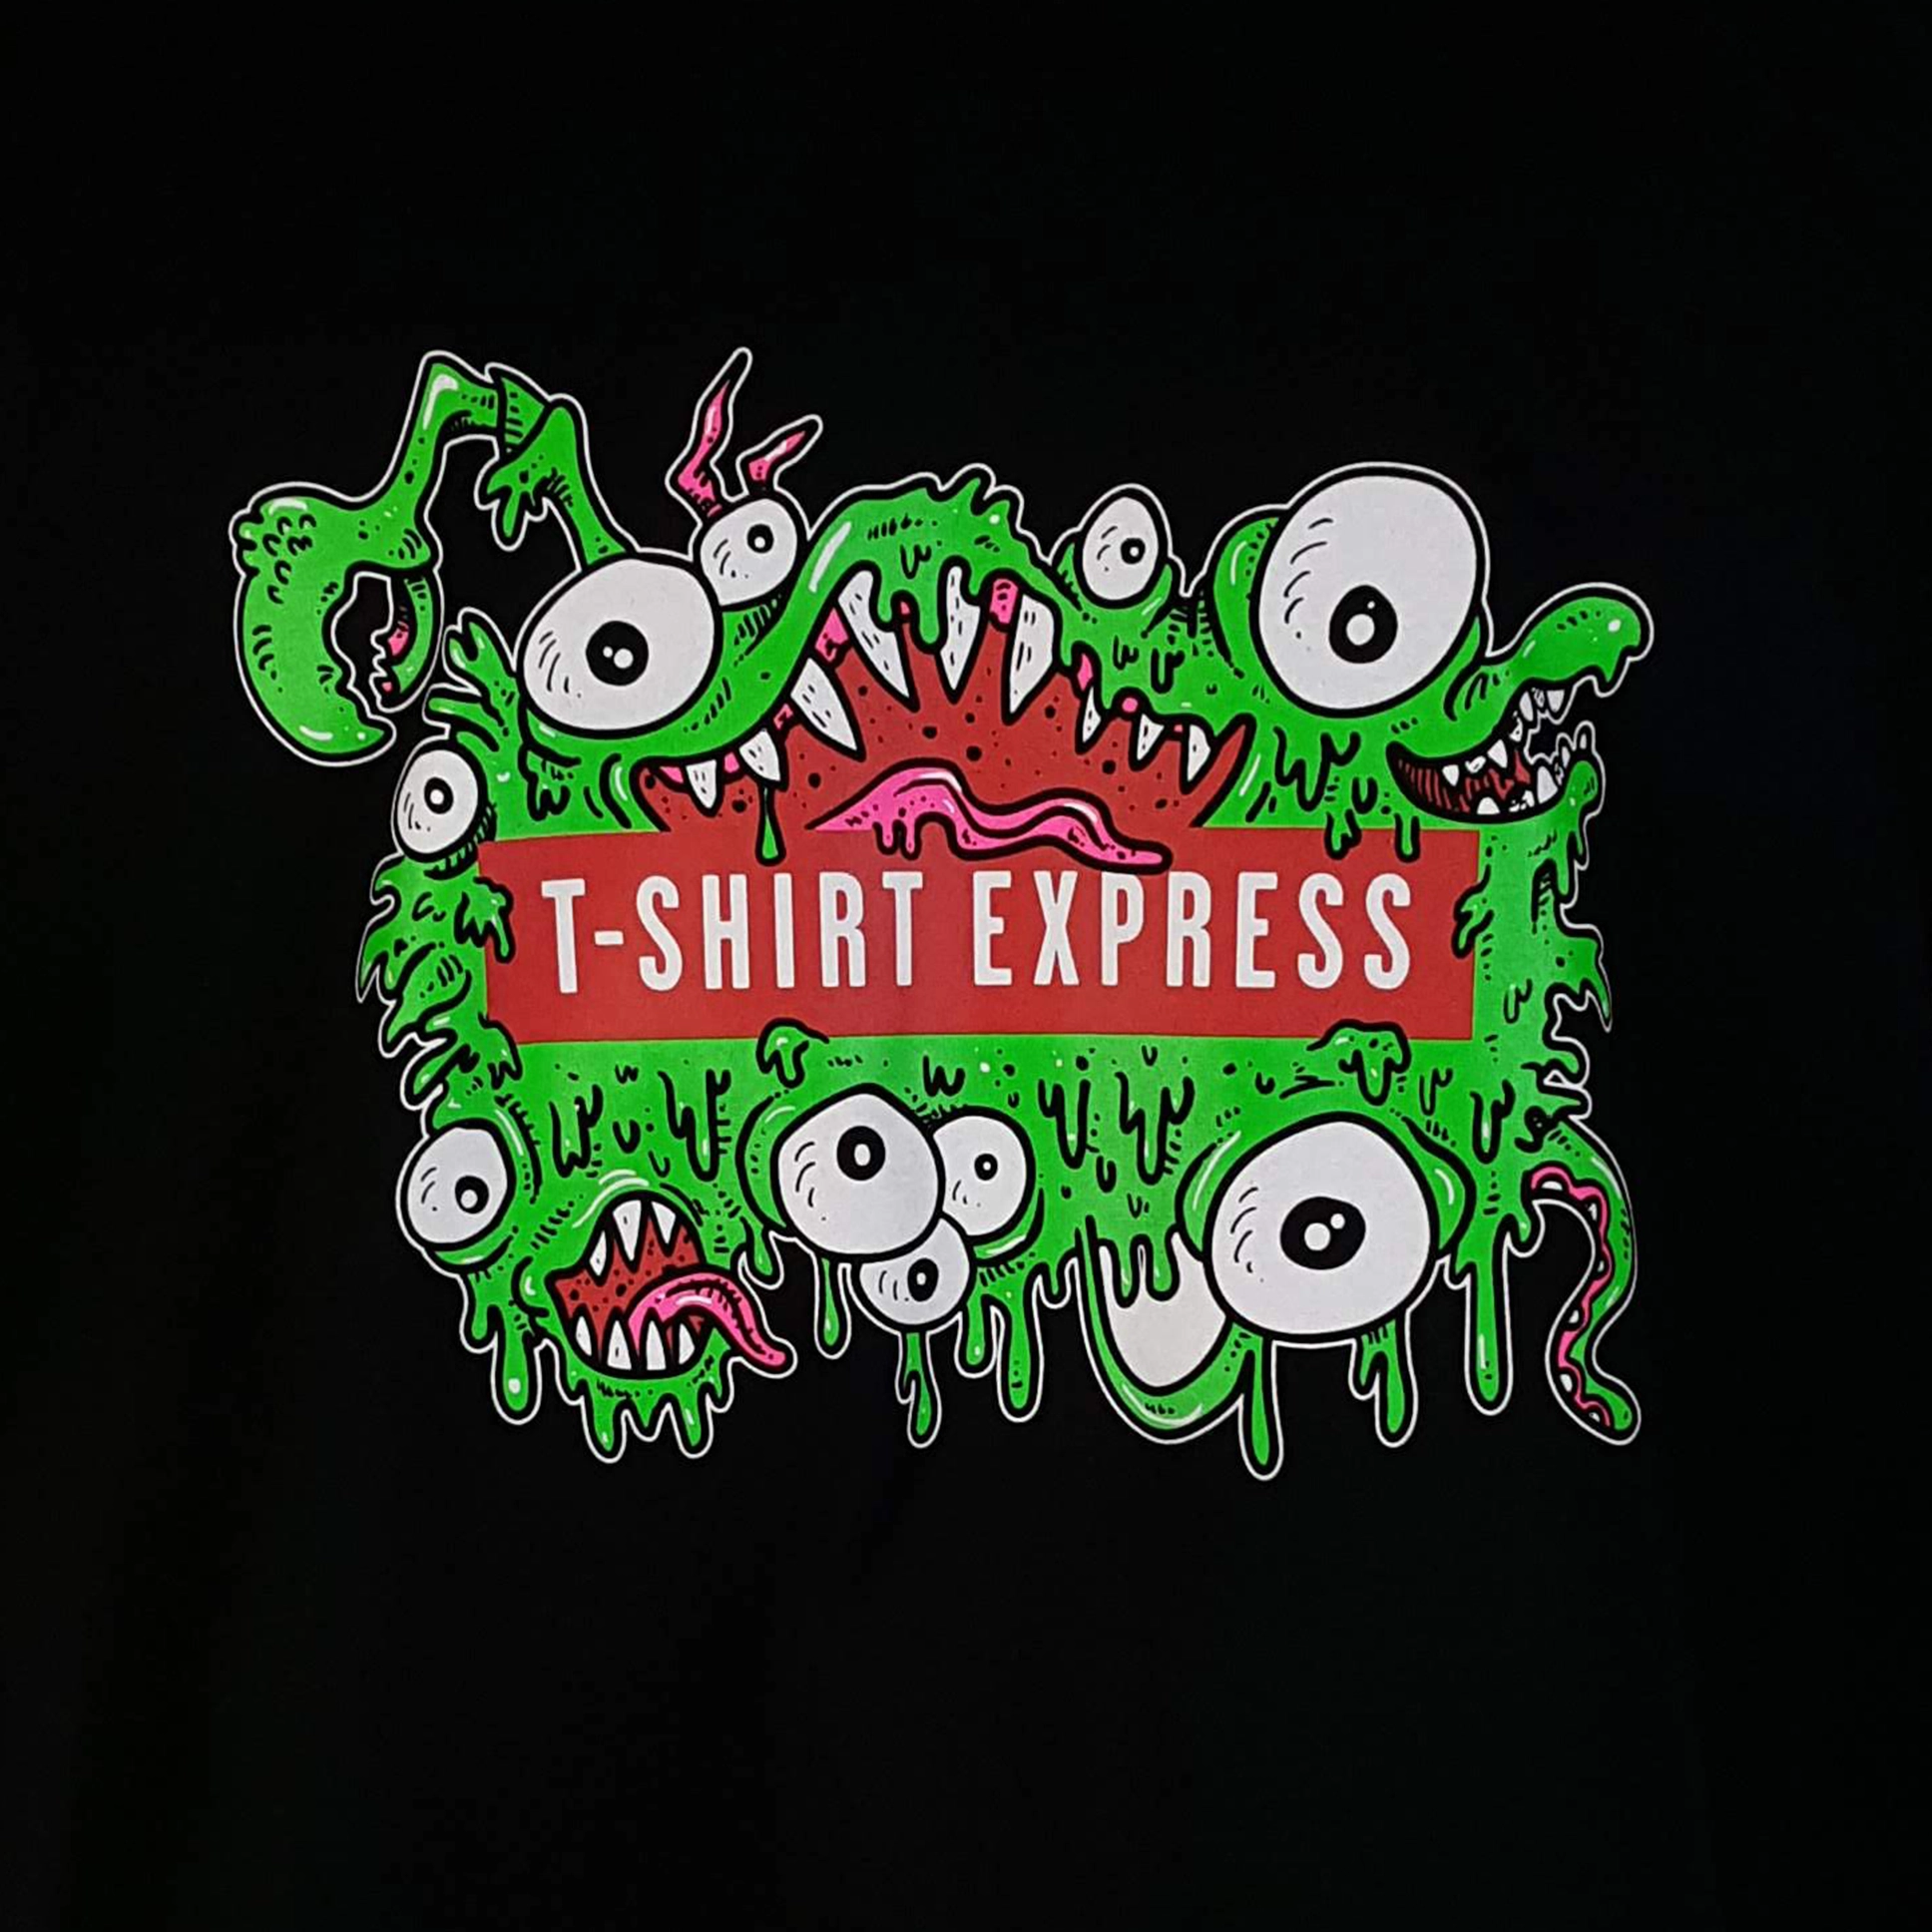 t-shirt express in Coshocton ohio